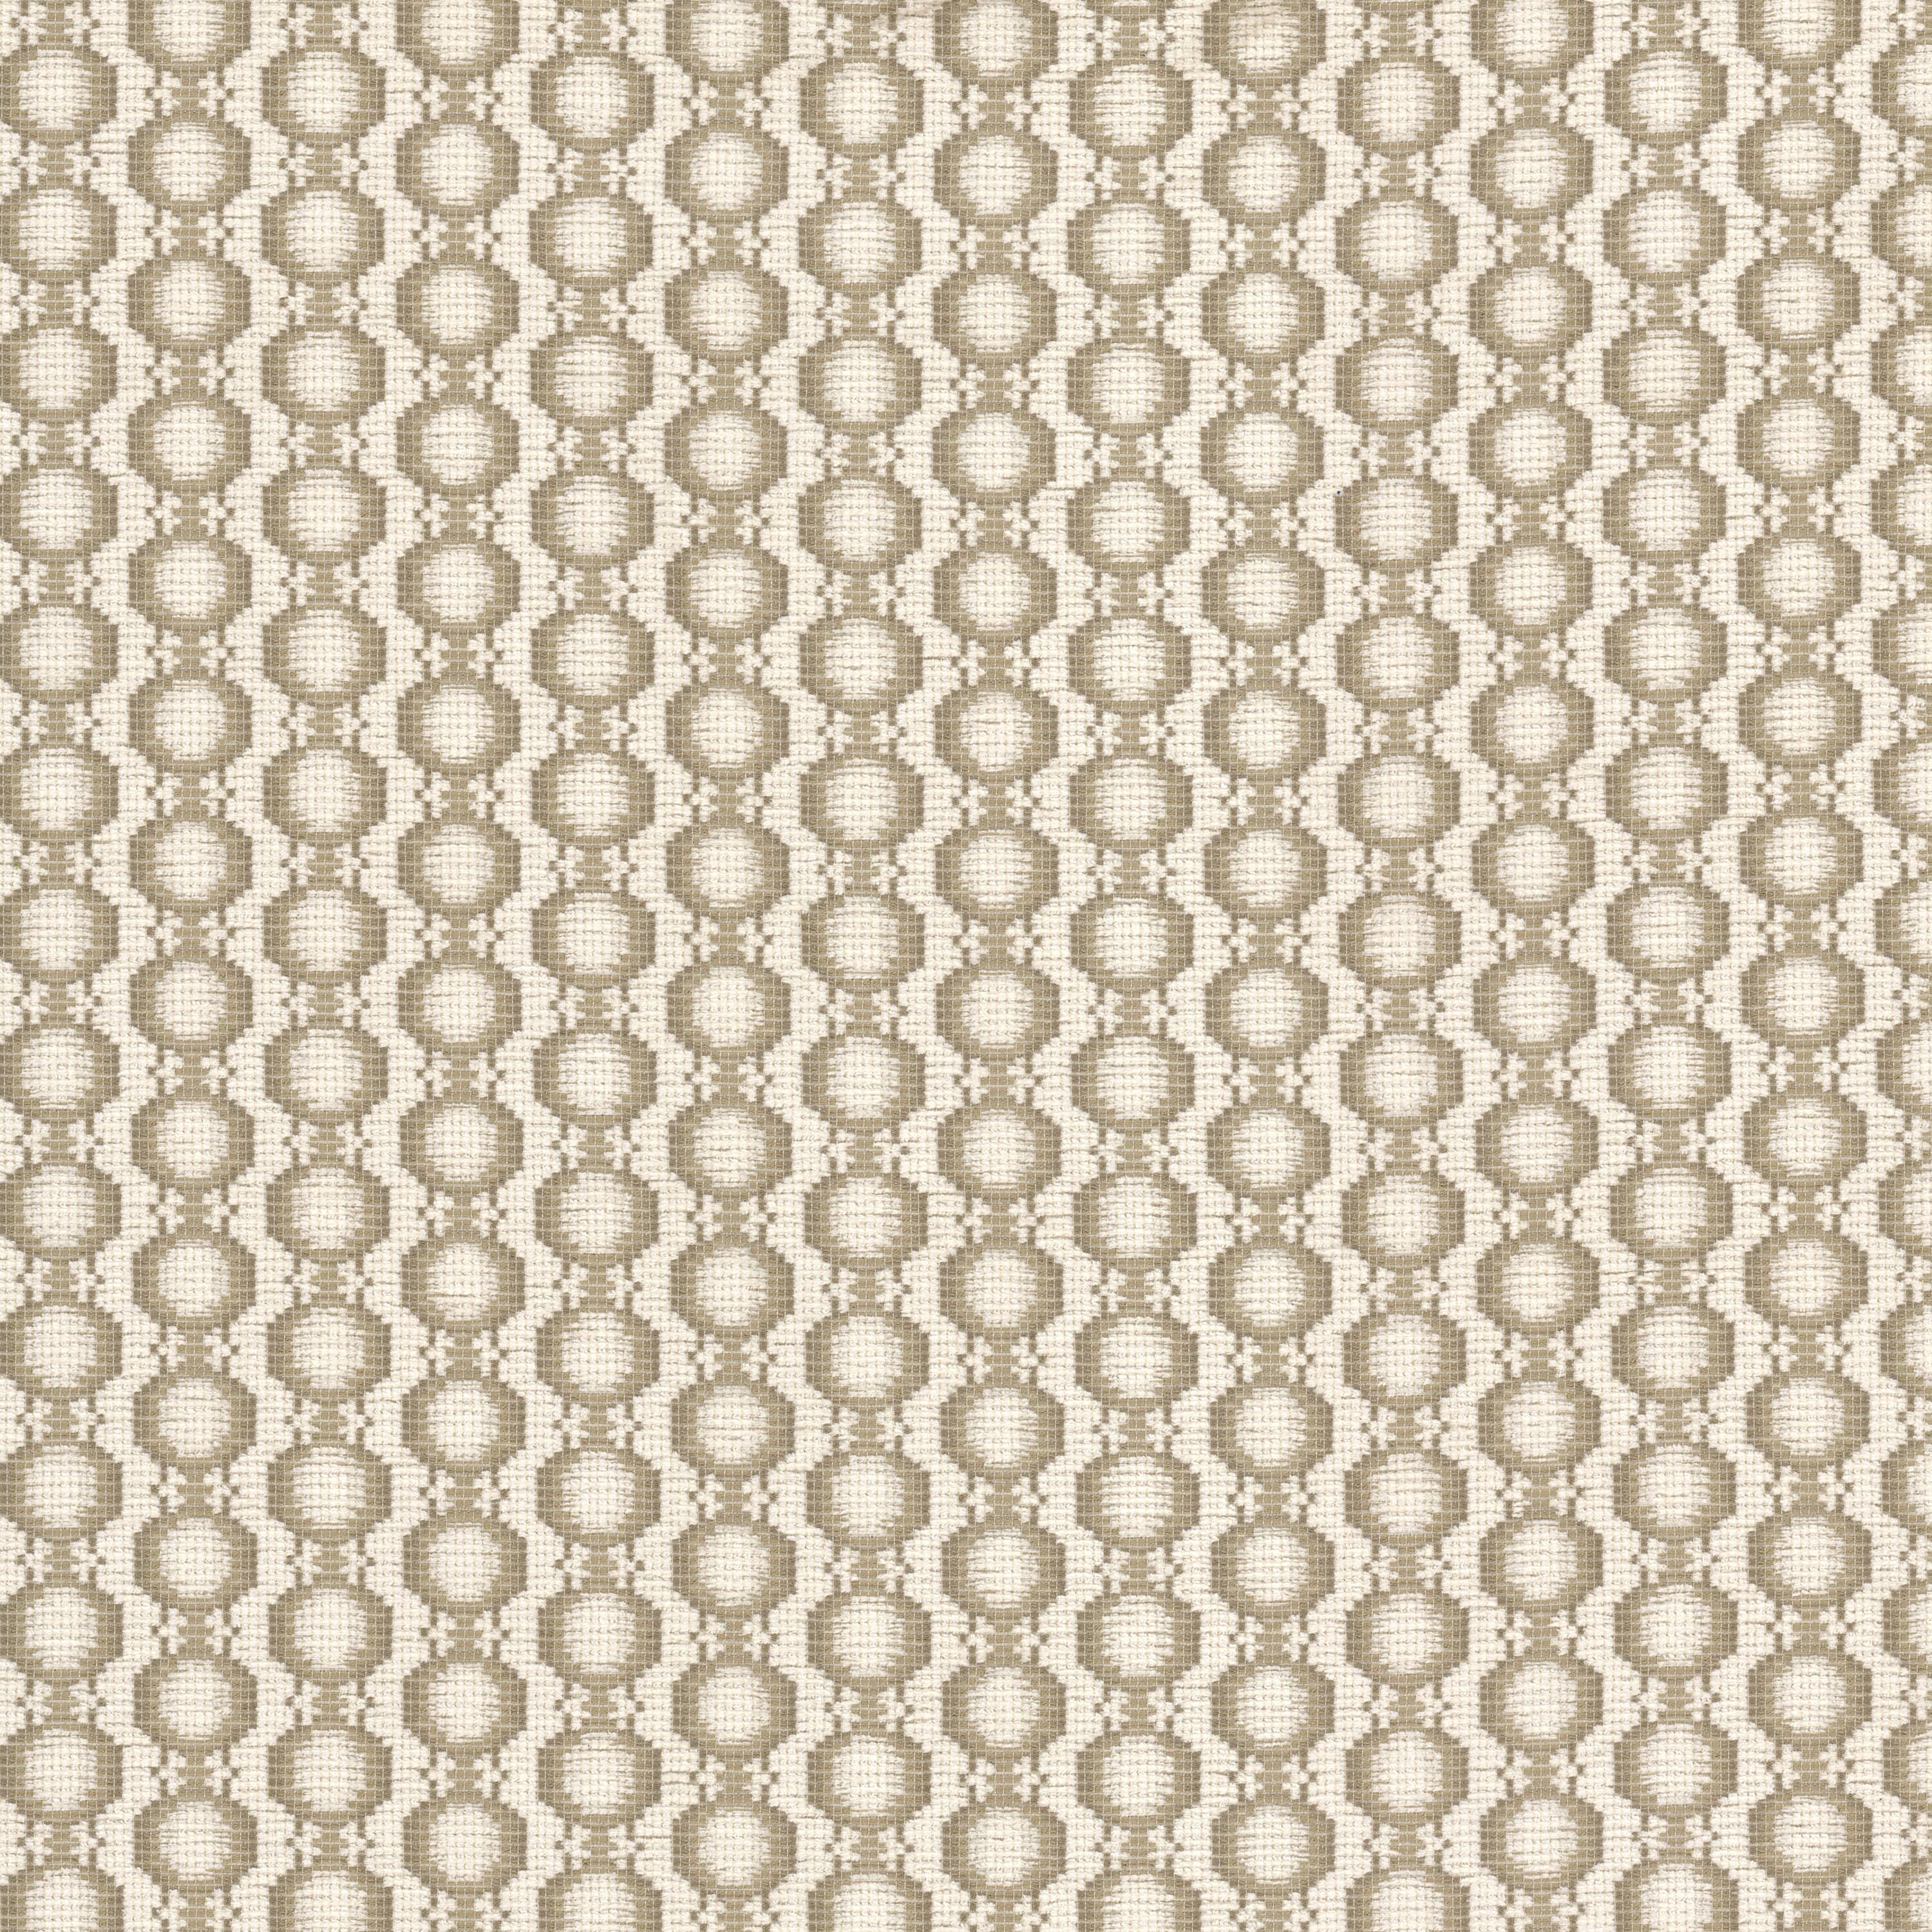 Crystal 2 Beige by Stout Fabric